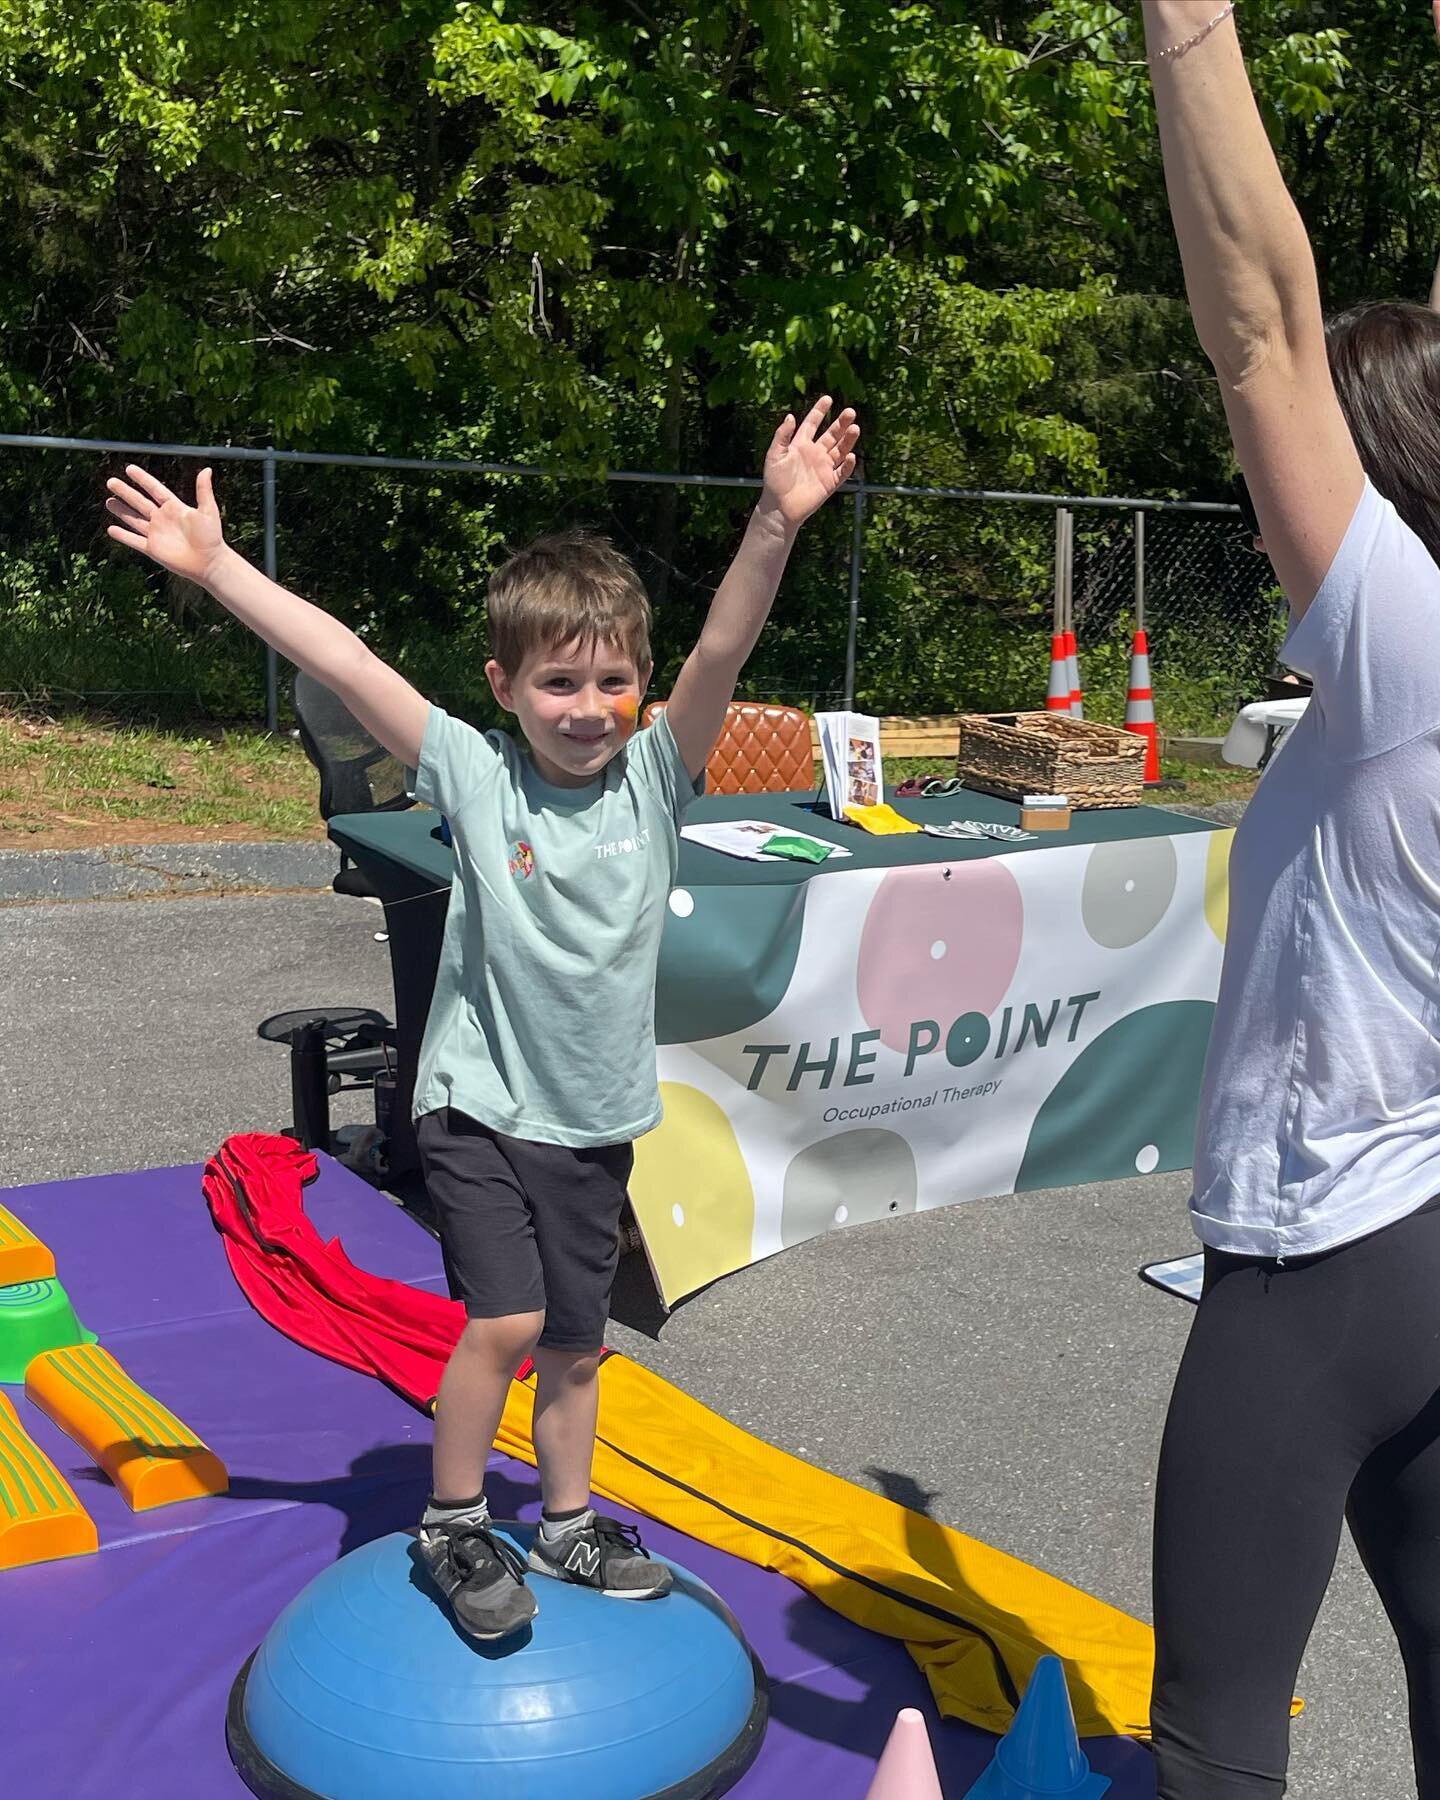 We had a blast at Children&rsquo;s Day at the Georgetown Hill Montgomery Square Campus!  Thank you for inviting The Point OT to this awesome event! Looking forward to next year! 🦉☀️